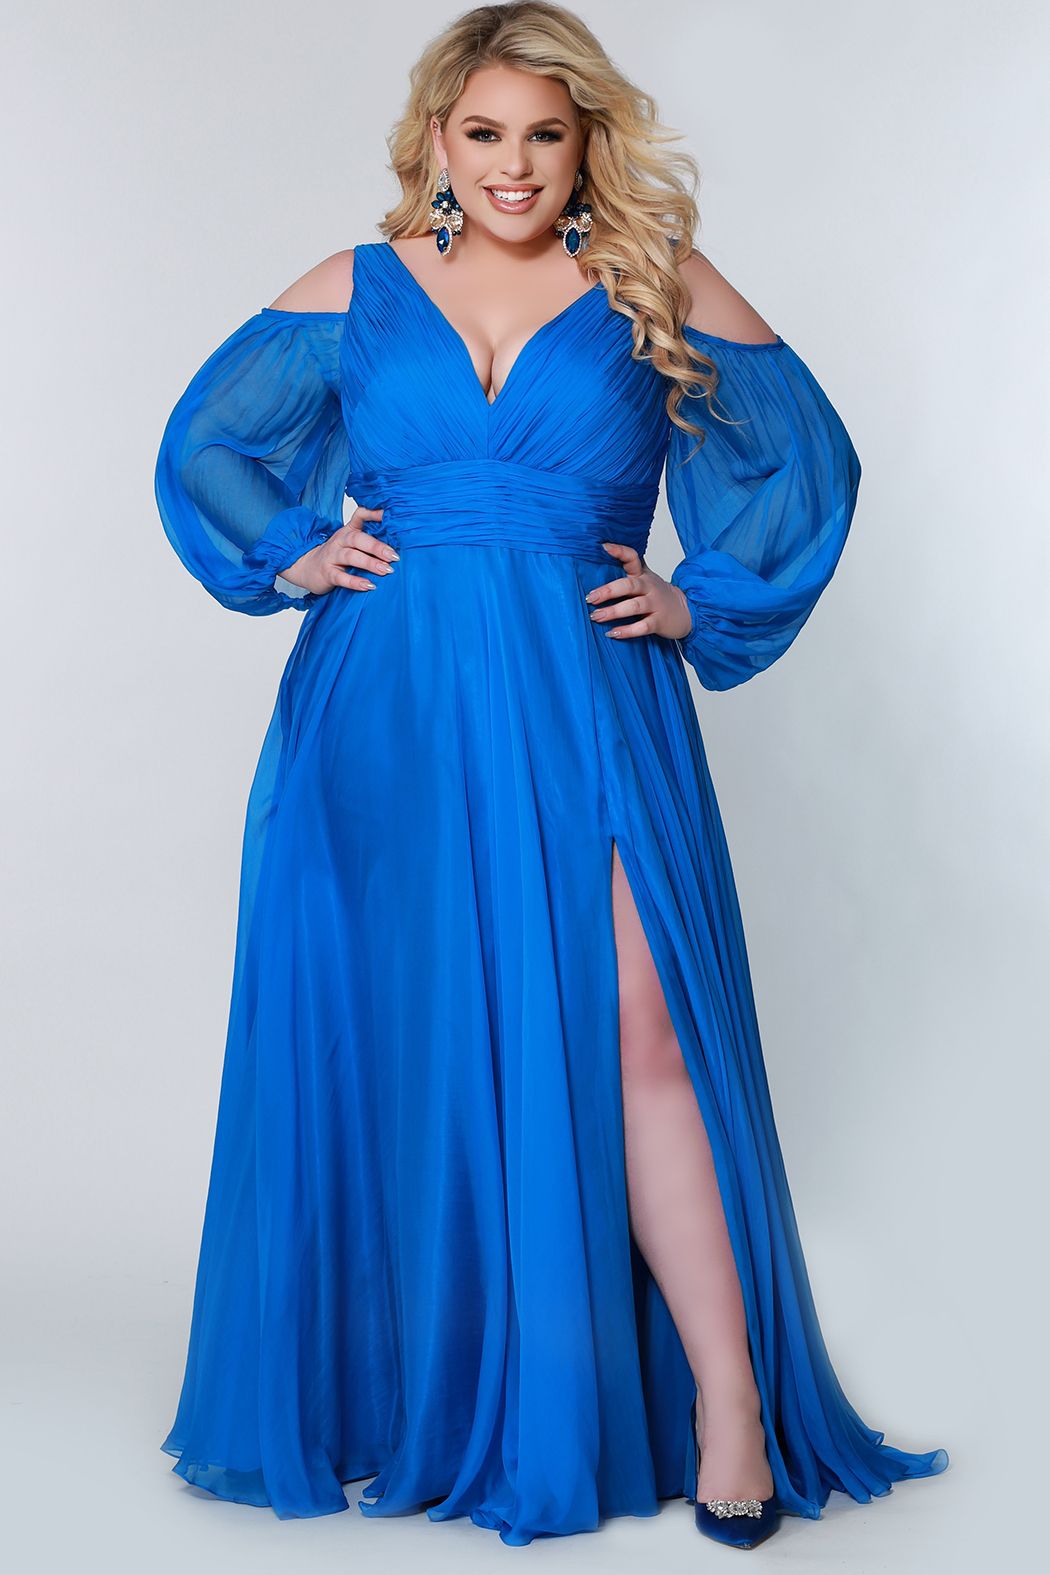 Johnathan Kayne for Sydney's Closet JK2205 A-Line Poly Chiffon Cold Shoulder Long Pouf See-Thru Sleeves Plus Size Prom Dress. Make a fashion statement in the Johnathan Kayne for Sydney's Closet JK2205 prom dress. Crafted from soft poly chiffon, this A-line silhouette features see-thru sleeves and cold shoulders for added drama. With an elegant pouf skirt, this plus size dress ensures superior comfort and absolute confidence.